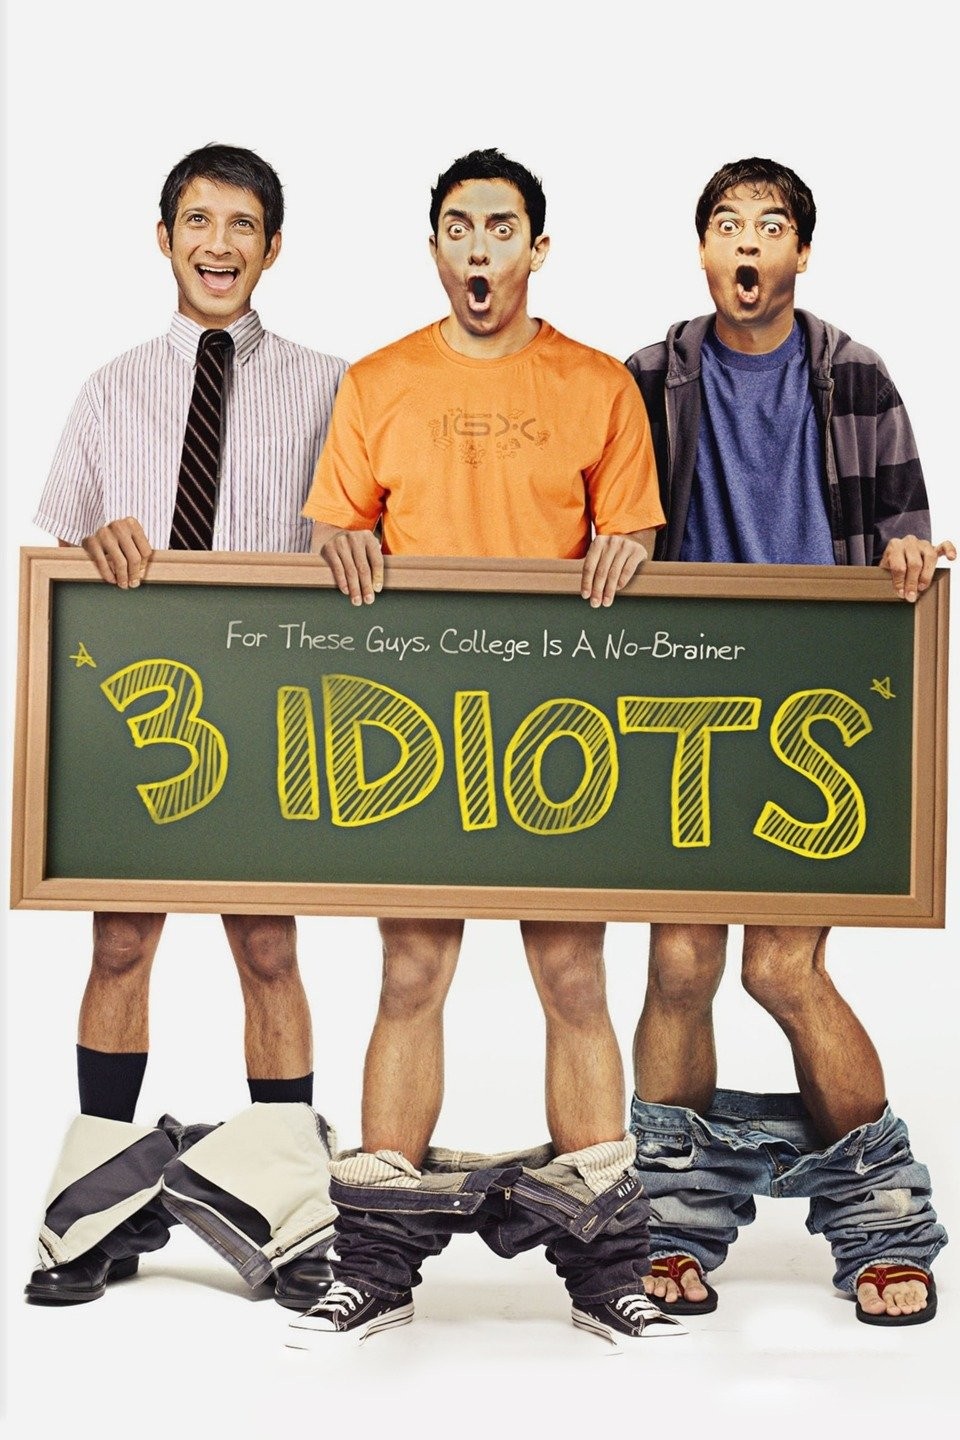 You Are an Idiot: Video Gallery